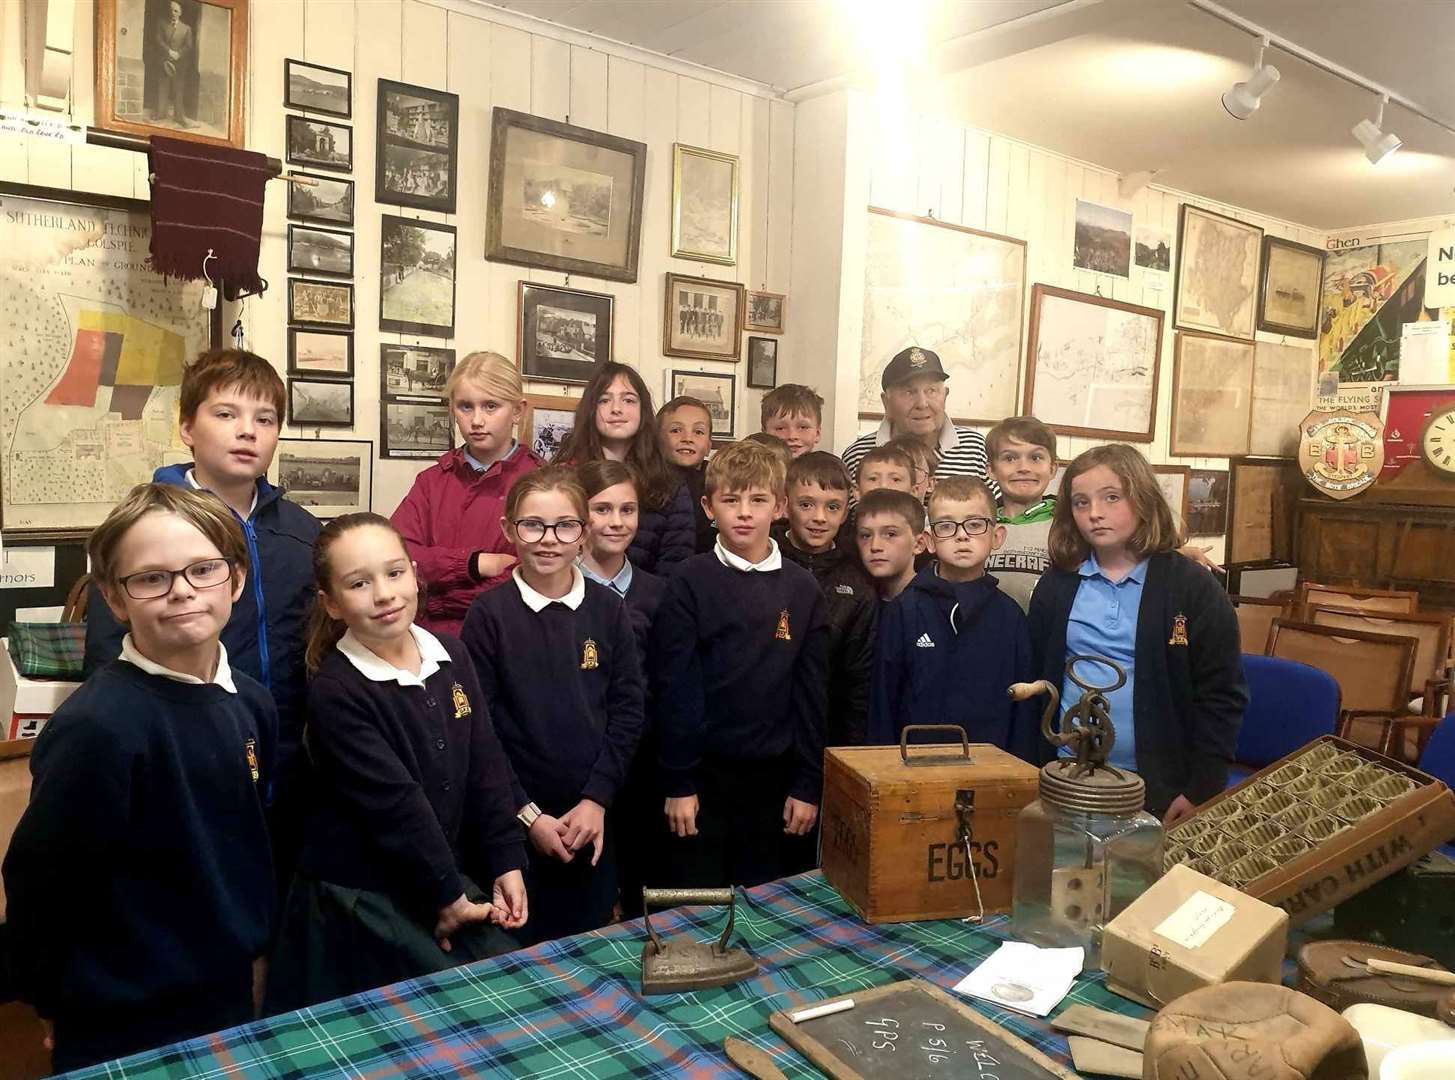 Golspie Primary School pupils visited the village's heritage centre to find out what life was like in 1912.